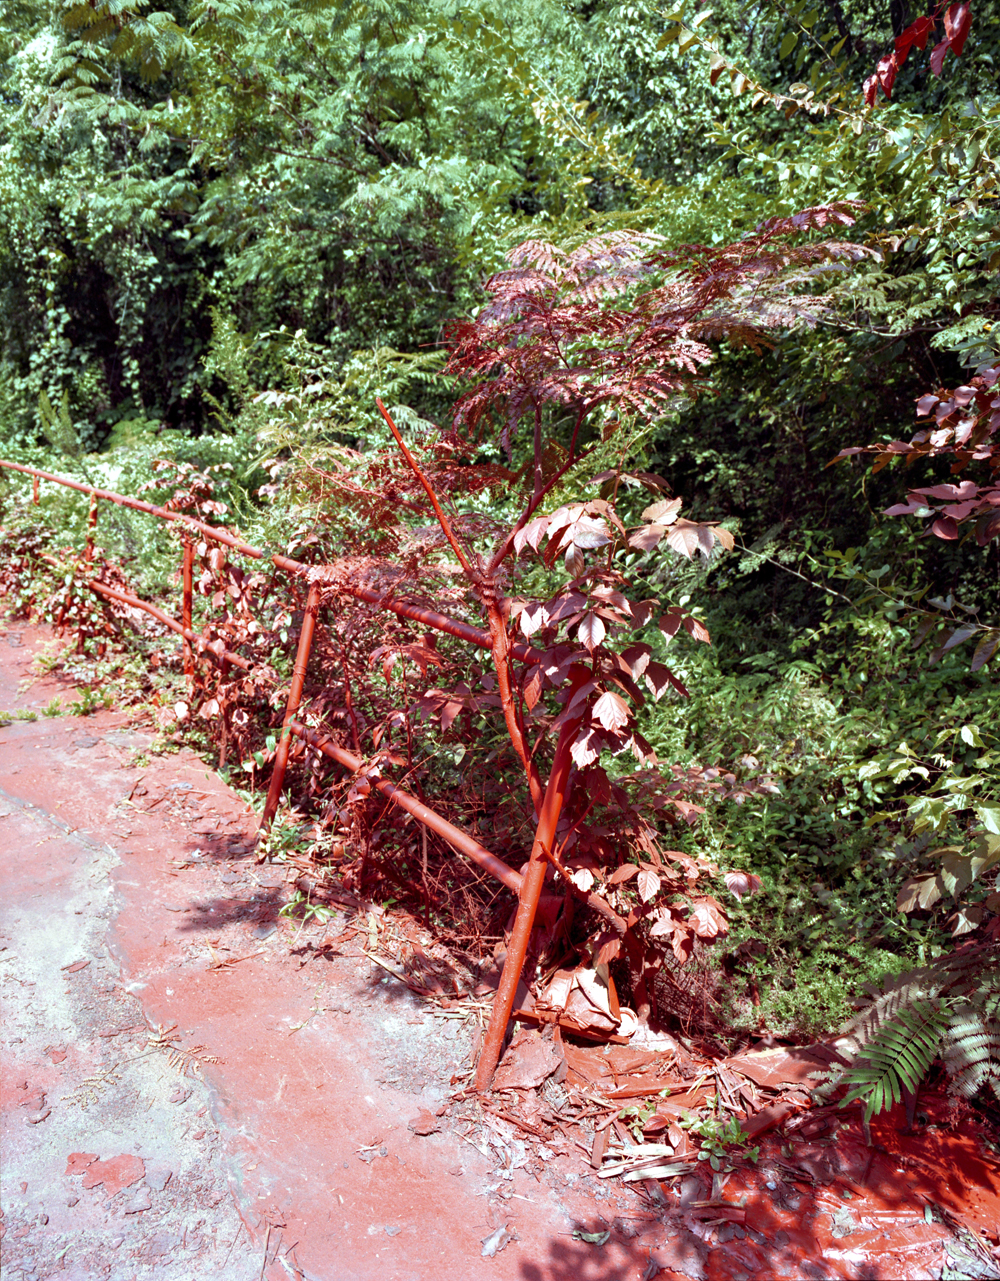 A view of part of a tree, street, and rails that were painted red